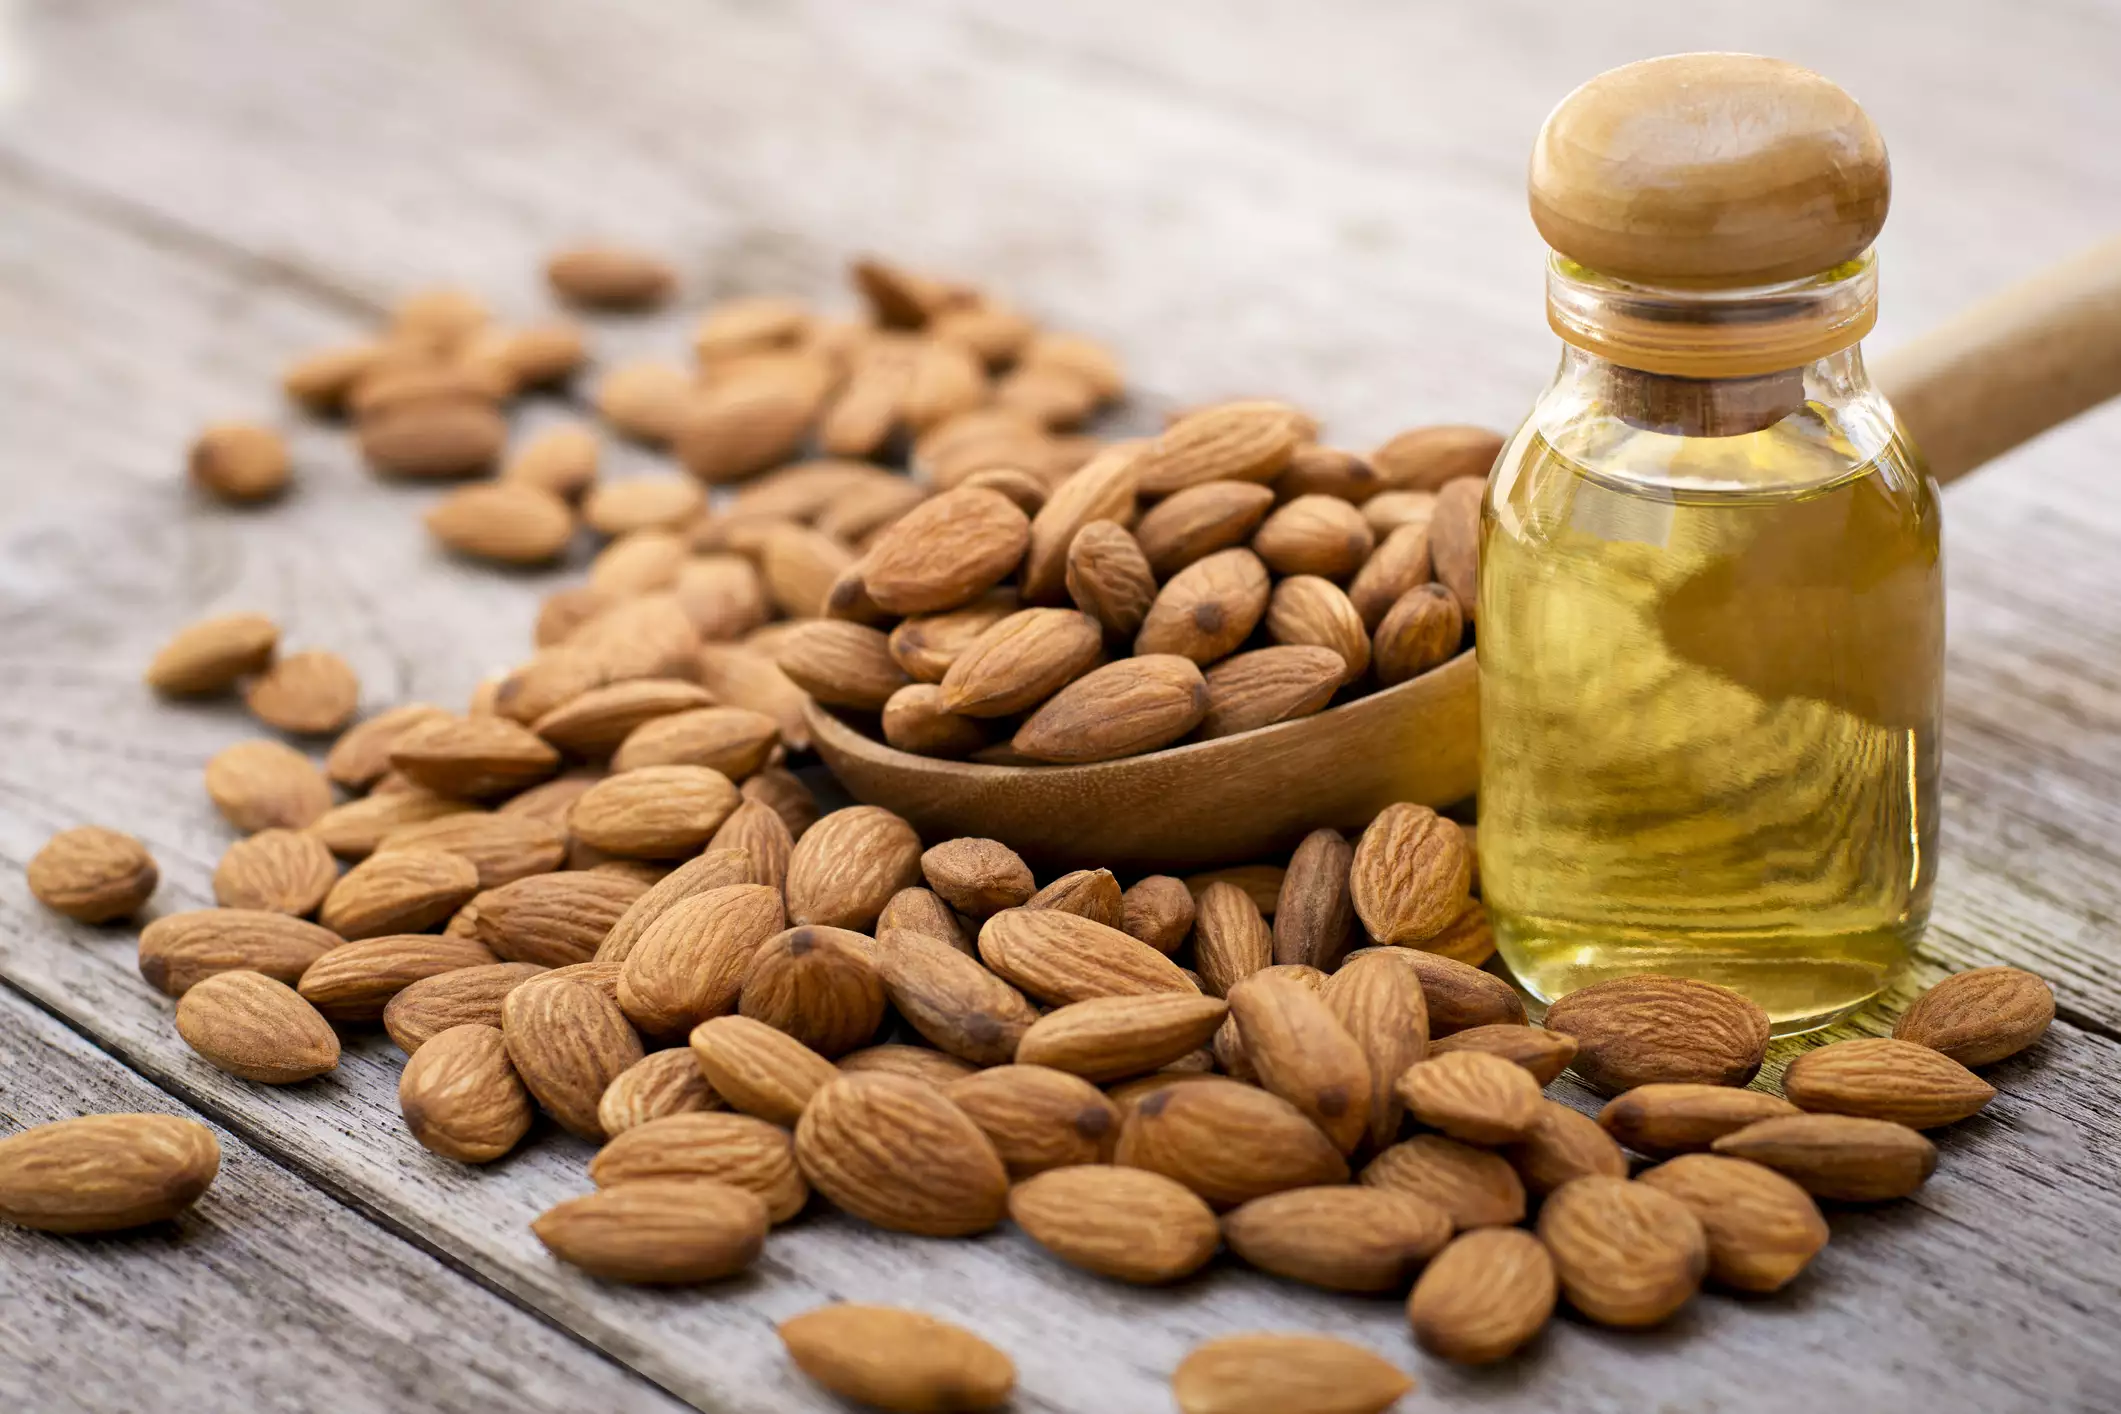 Closeup almond oil in glass bottle and group of almond nuts in wooden spoon isolated on wood table background.